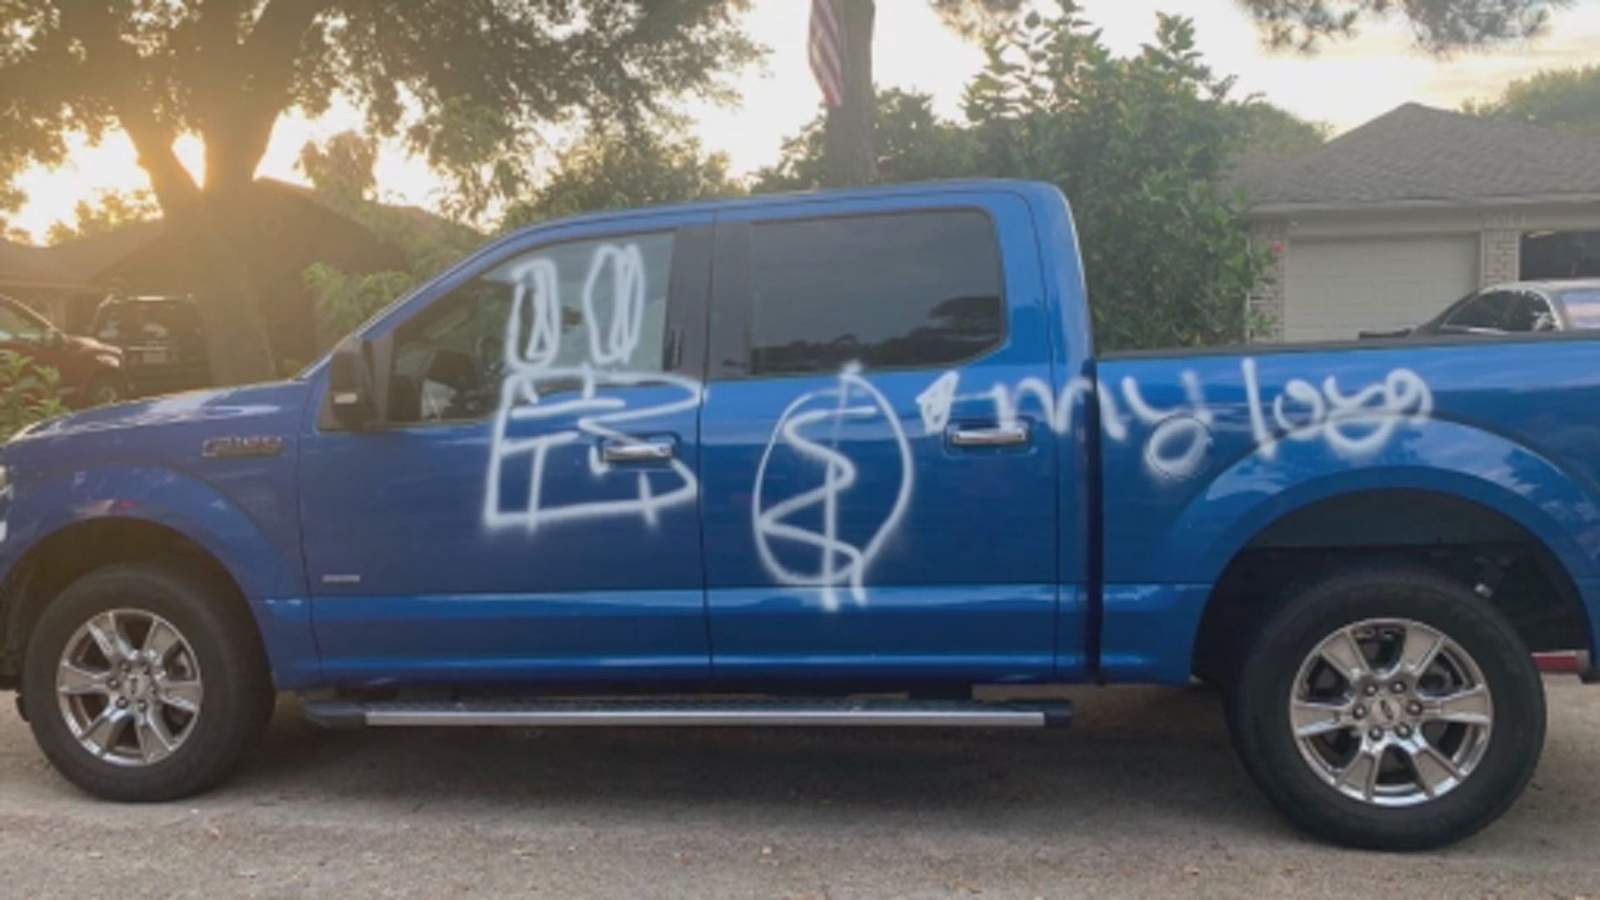 N-word and other vulgar language, images spray-painted on dozens of cars in Hickory Creek Neighborhood